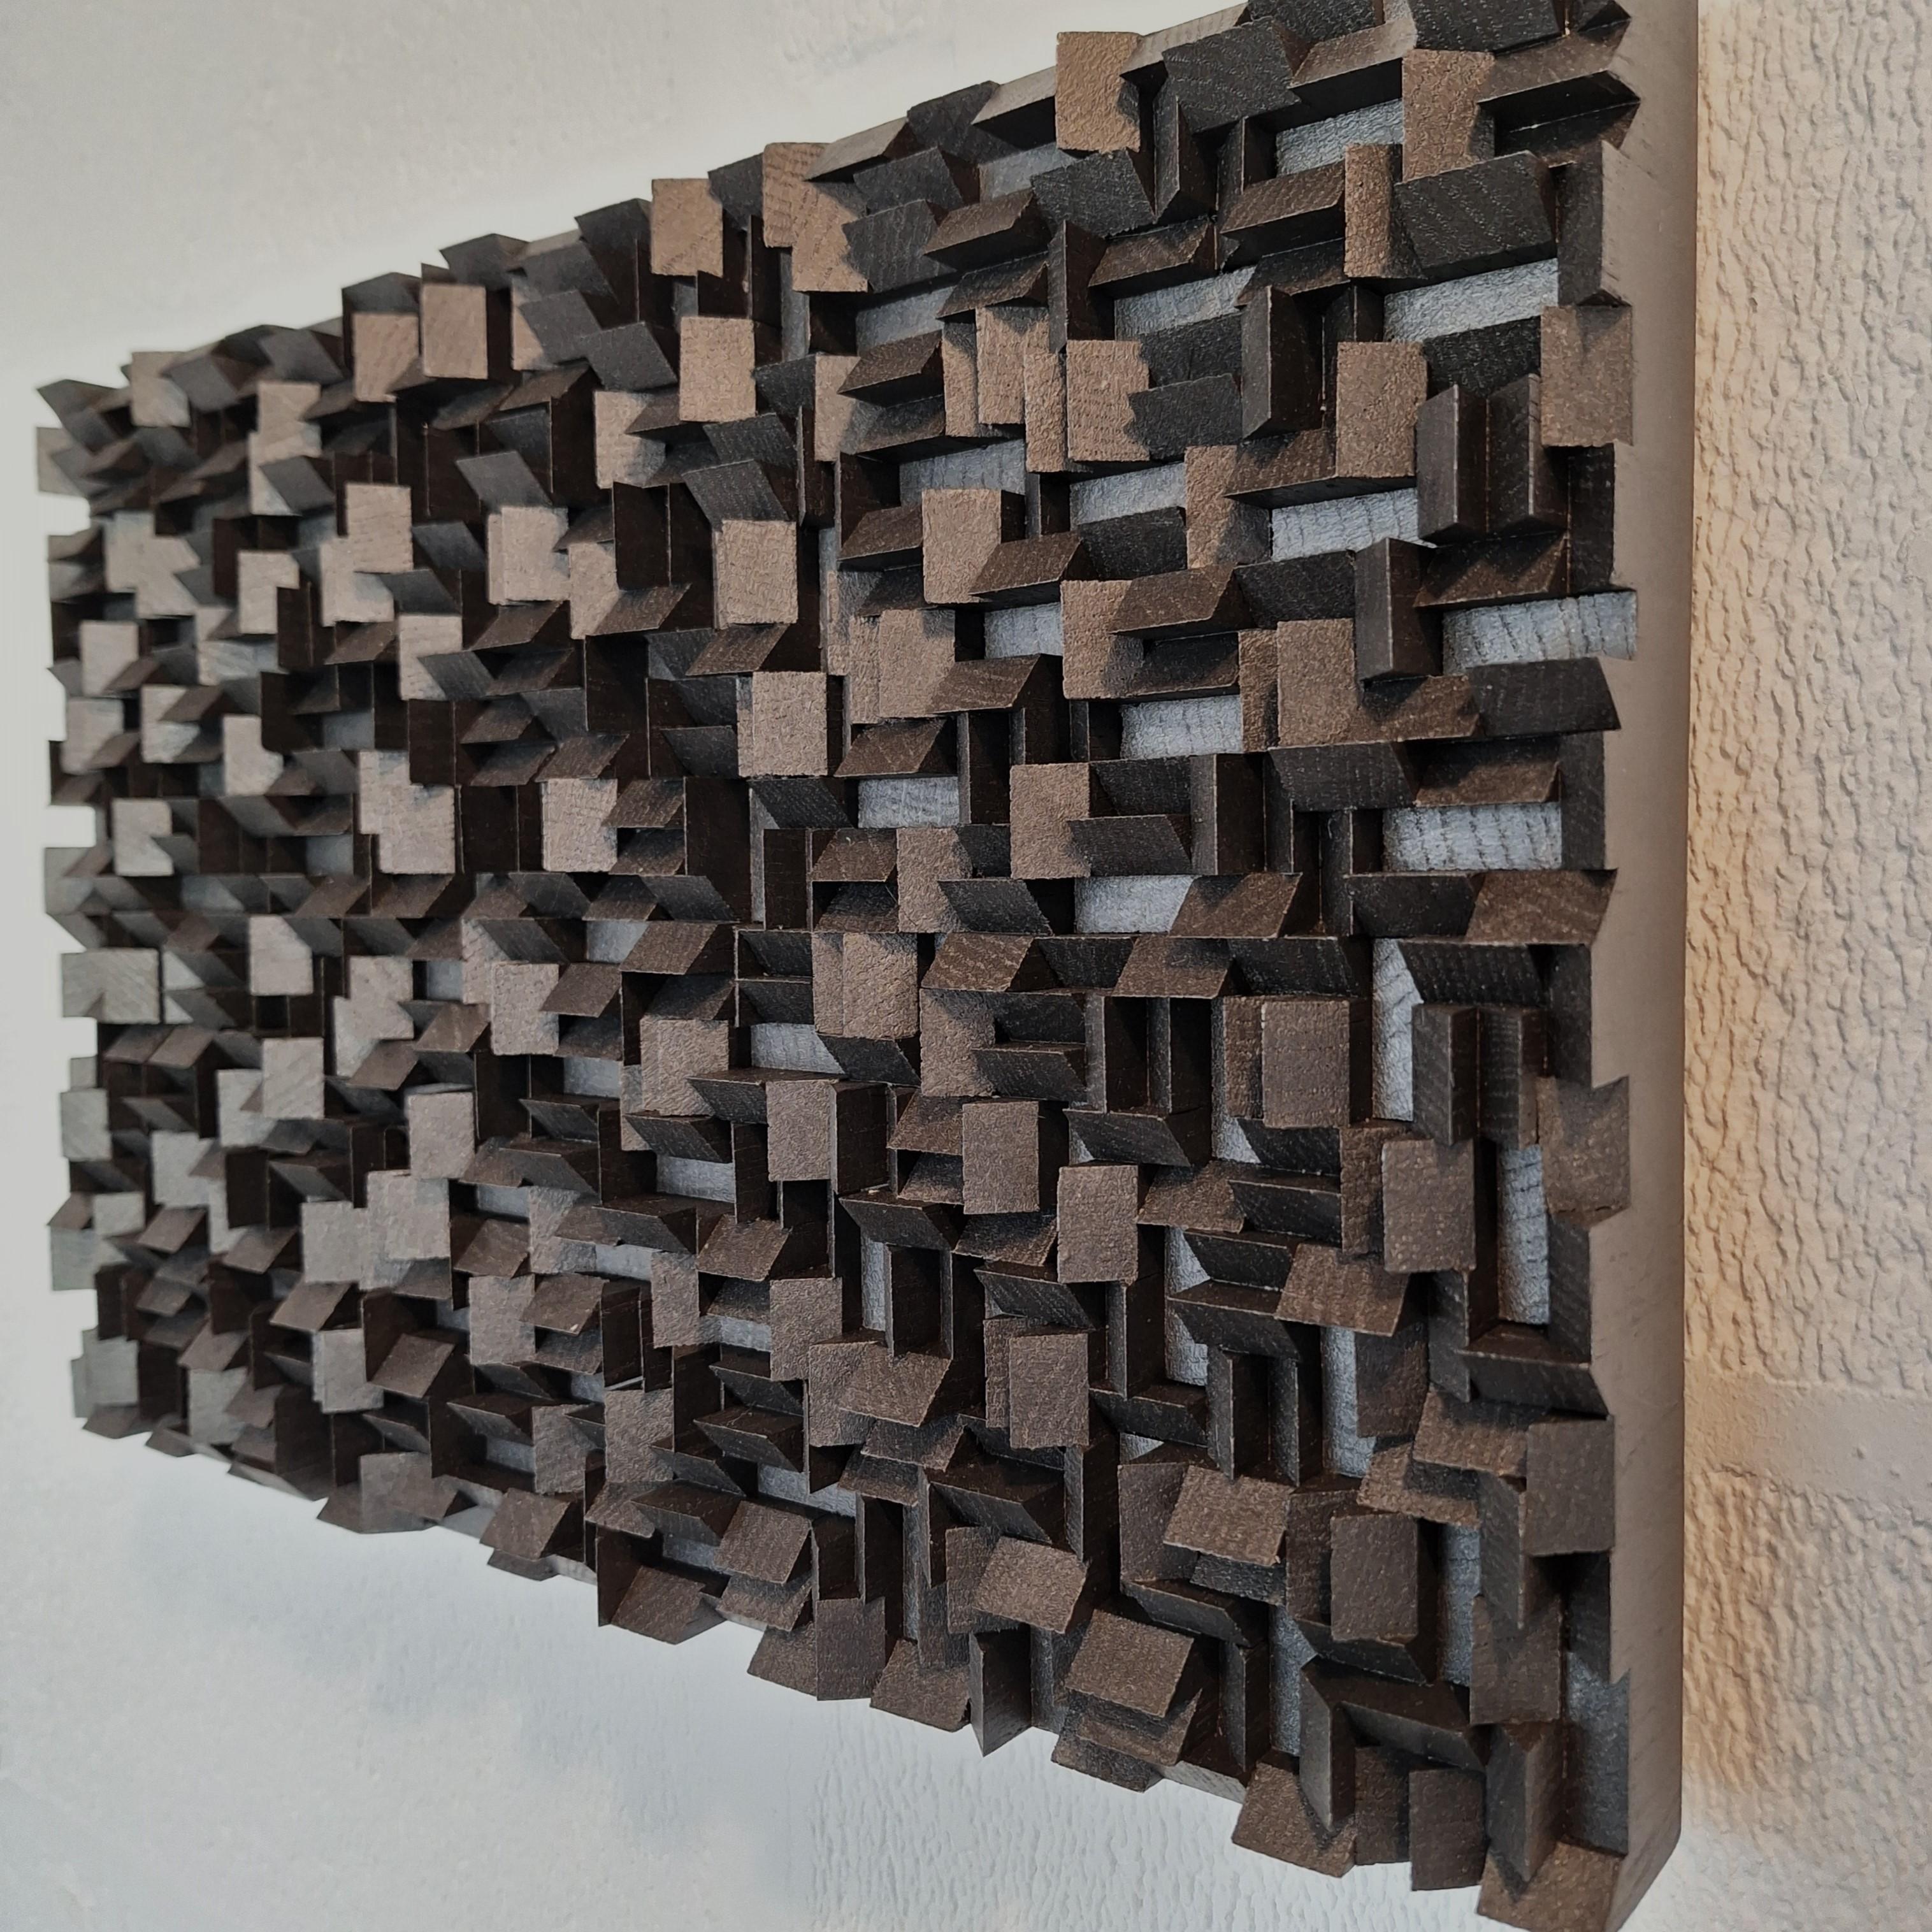 Variation rythmique VI belongs to the most recent series of seven different small and medium size contemporary modern sculpture painting reliefs by French-Dutch artist Olivier Julia. The relief is made from oak wood and finished with a mixture of